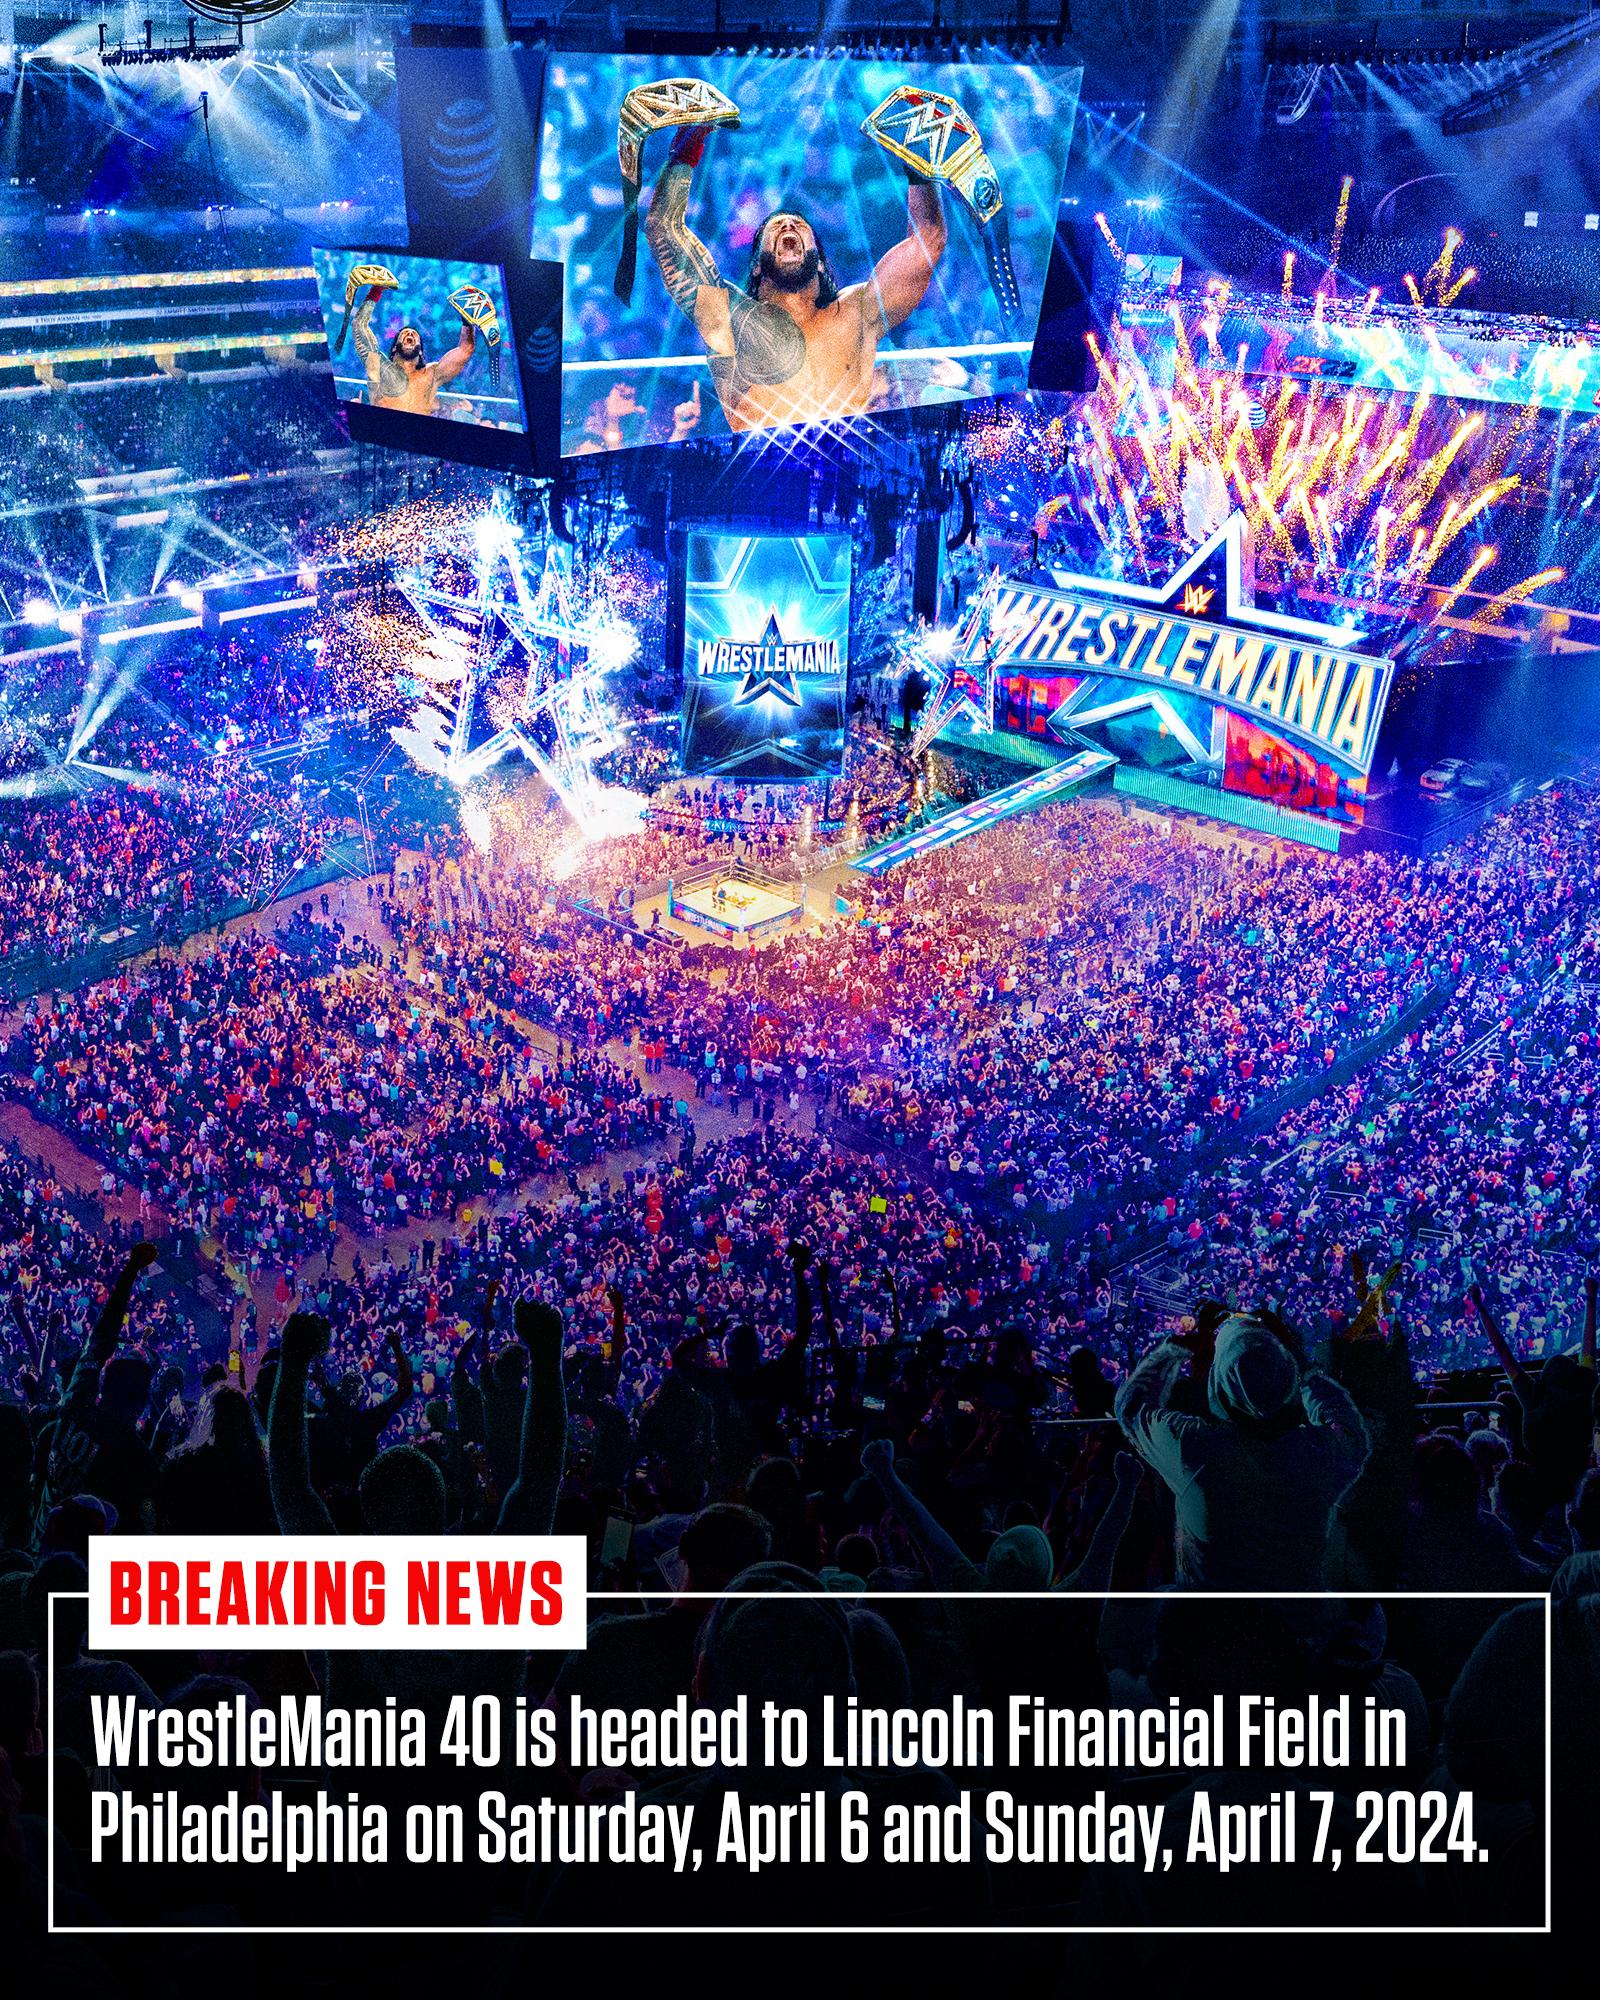 WWE announces iconic location for WrestleMania 40